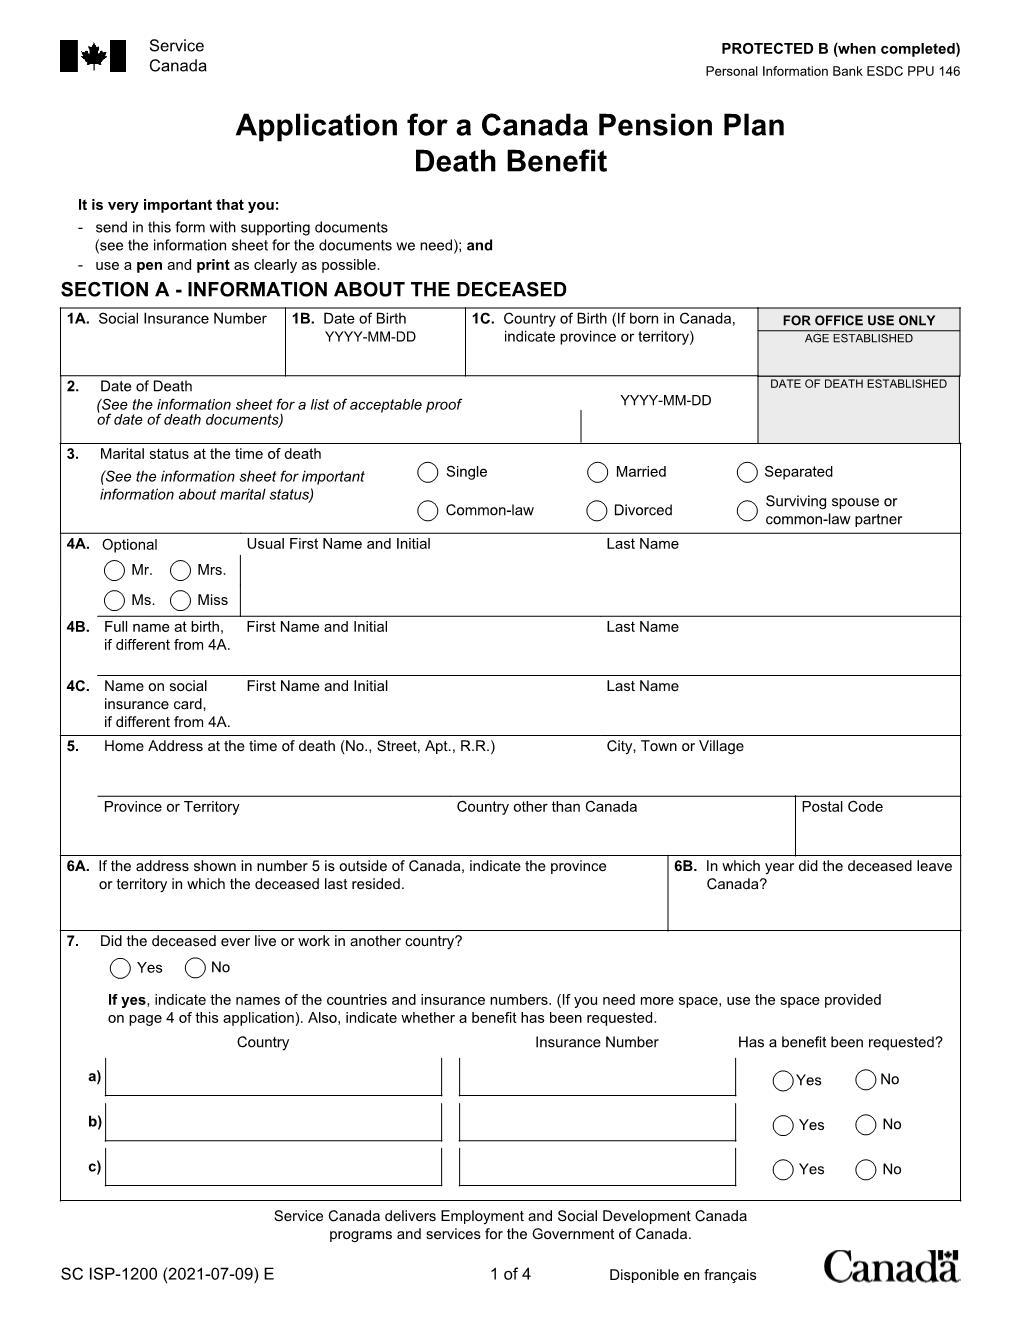 Application for CPP Death Benefit